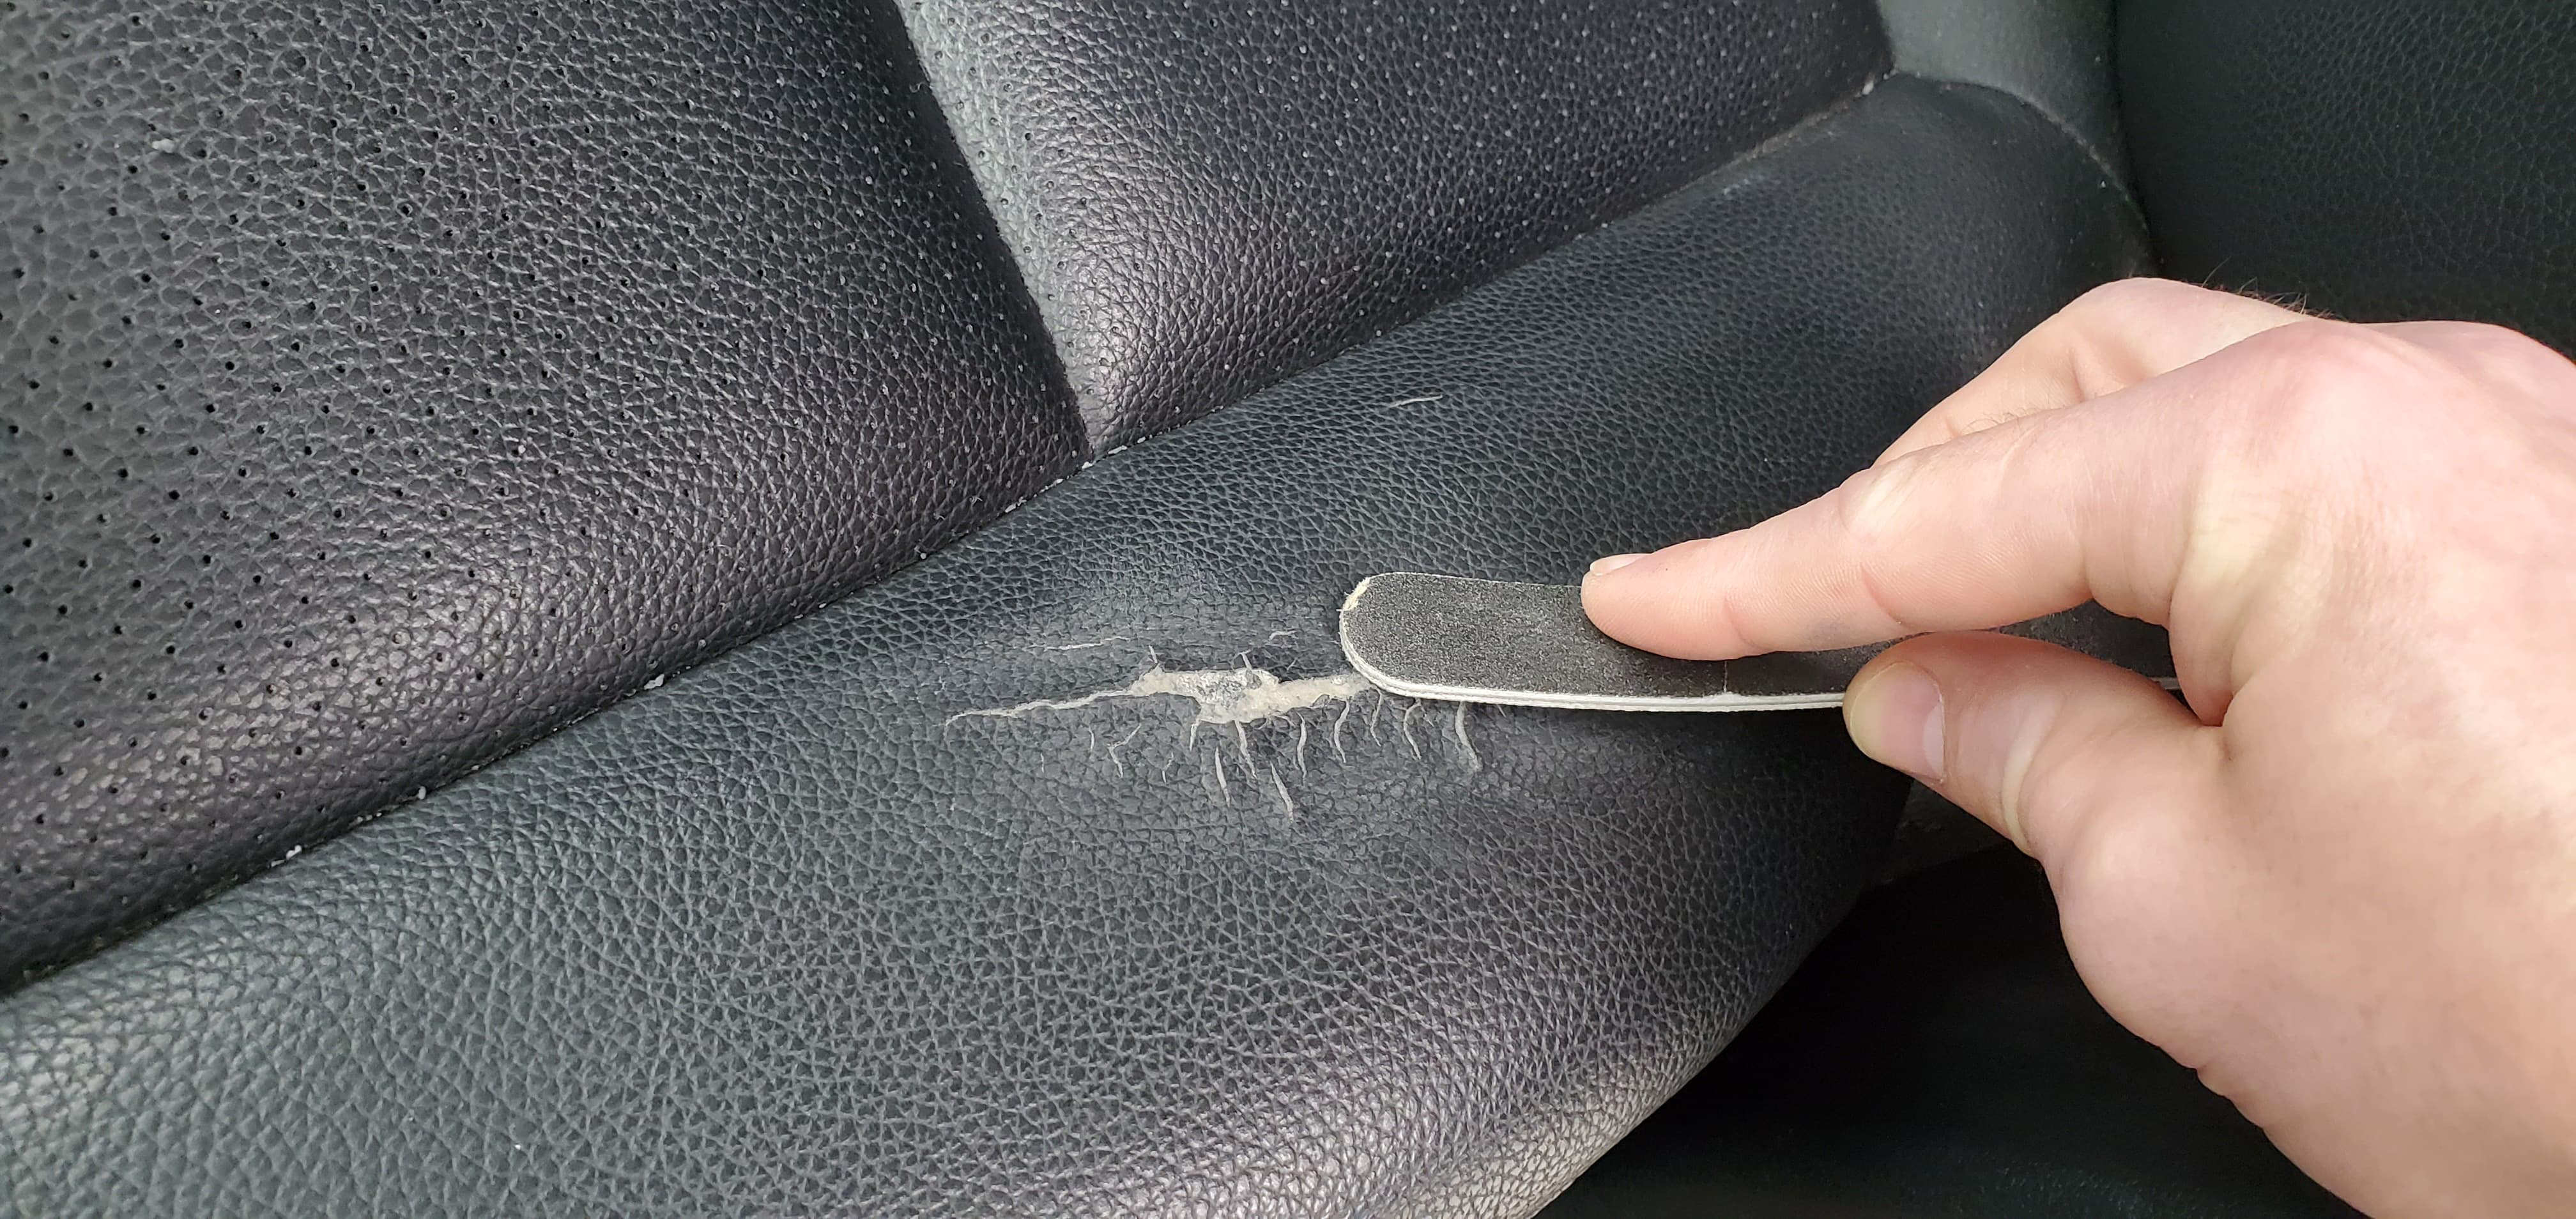 How To Repair A Leather Car Seat - How To Fix Rip In Leather Car Seat